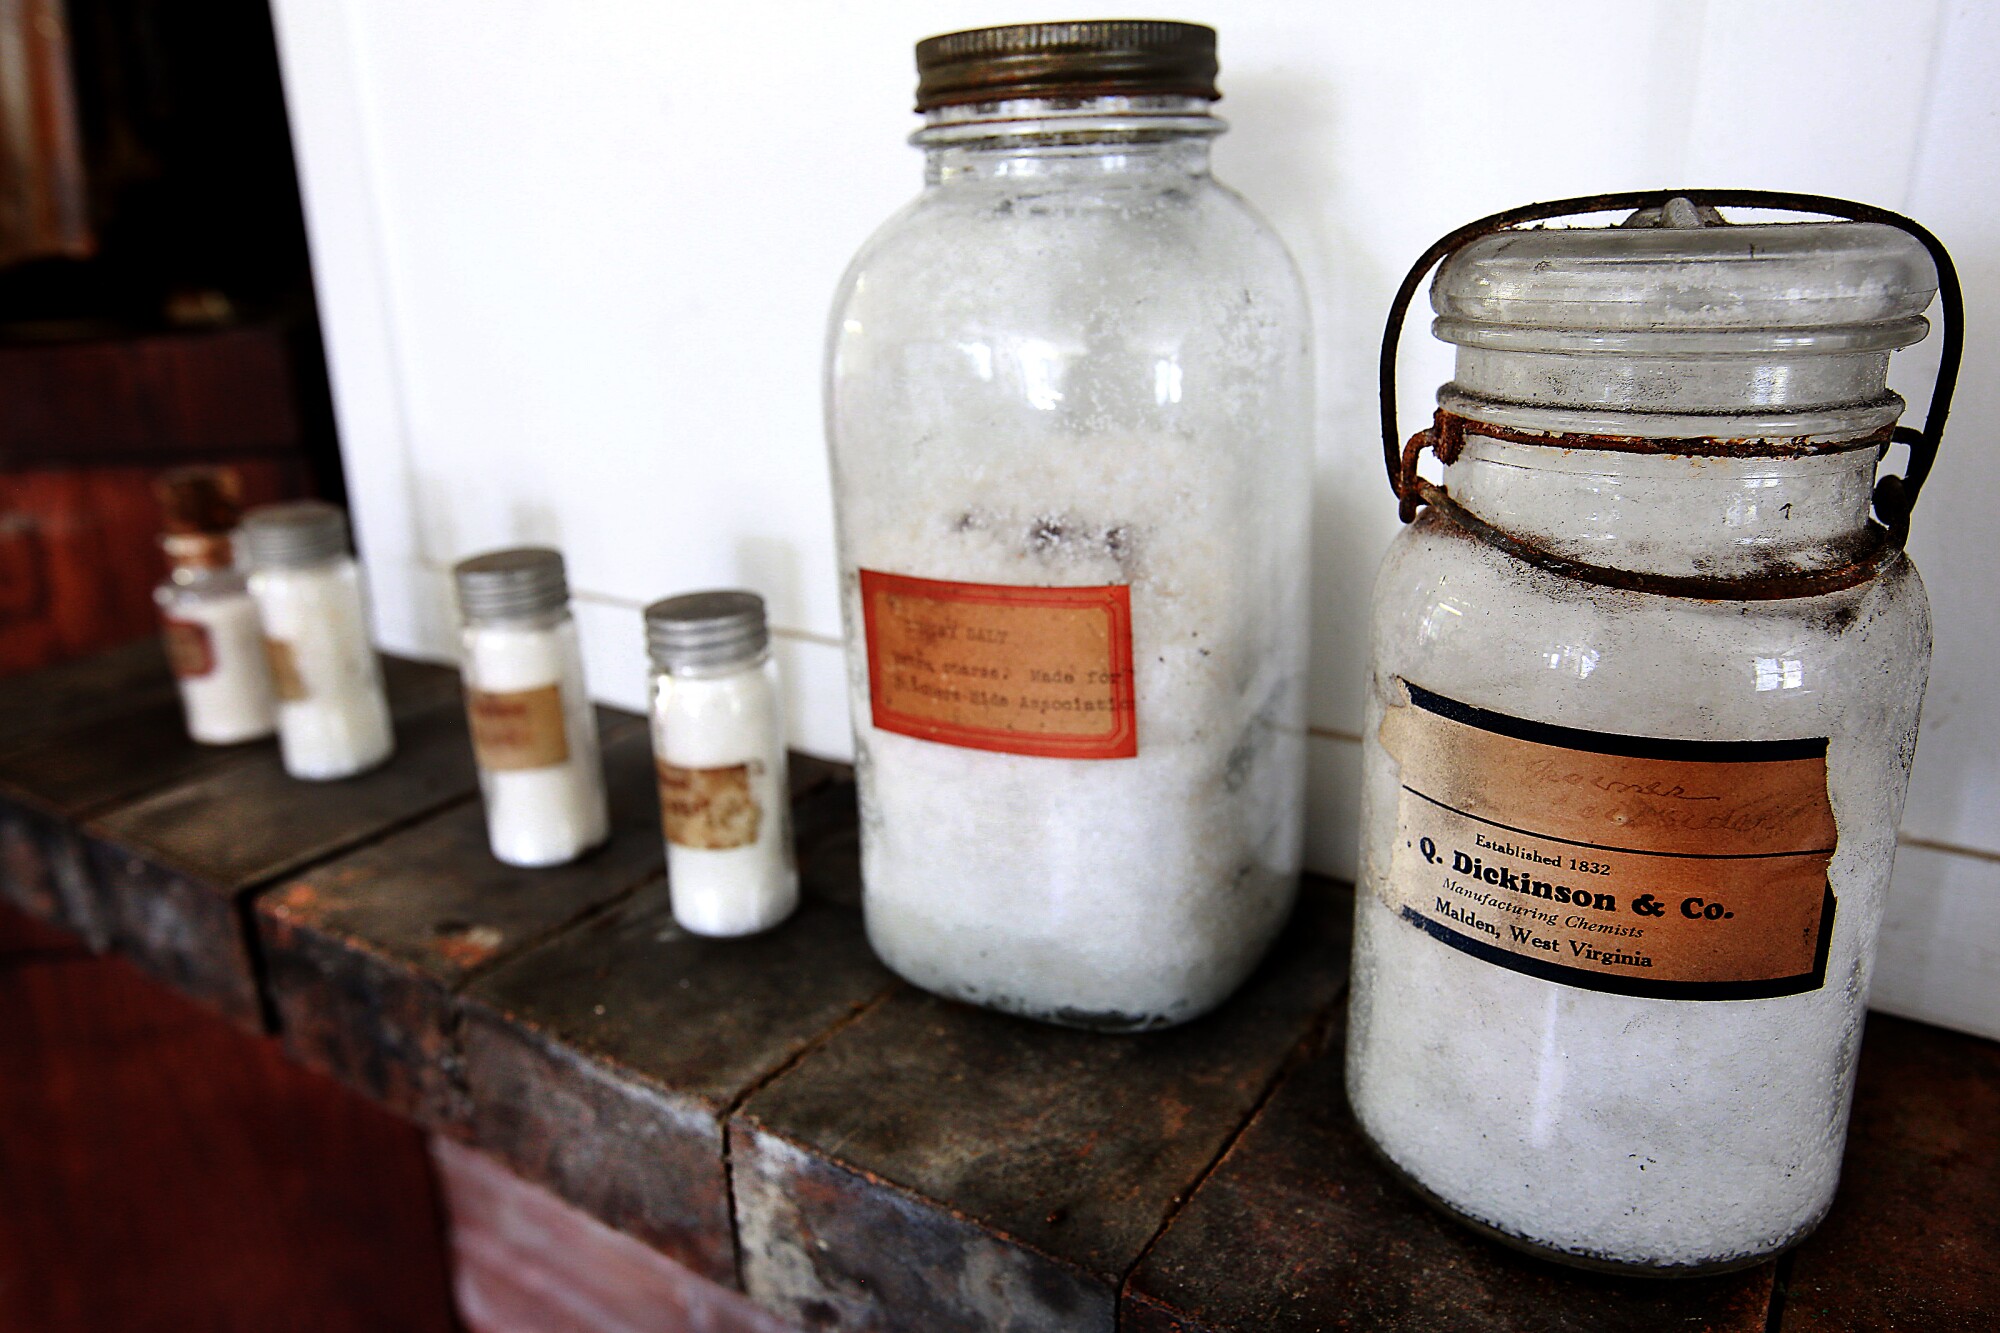 Salt samples from the 1930s at the J.Q. Dickinson Salt-Works in West Virginia.